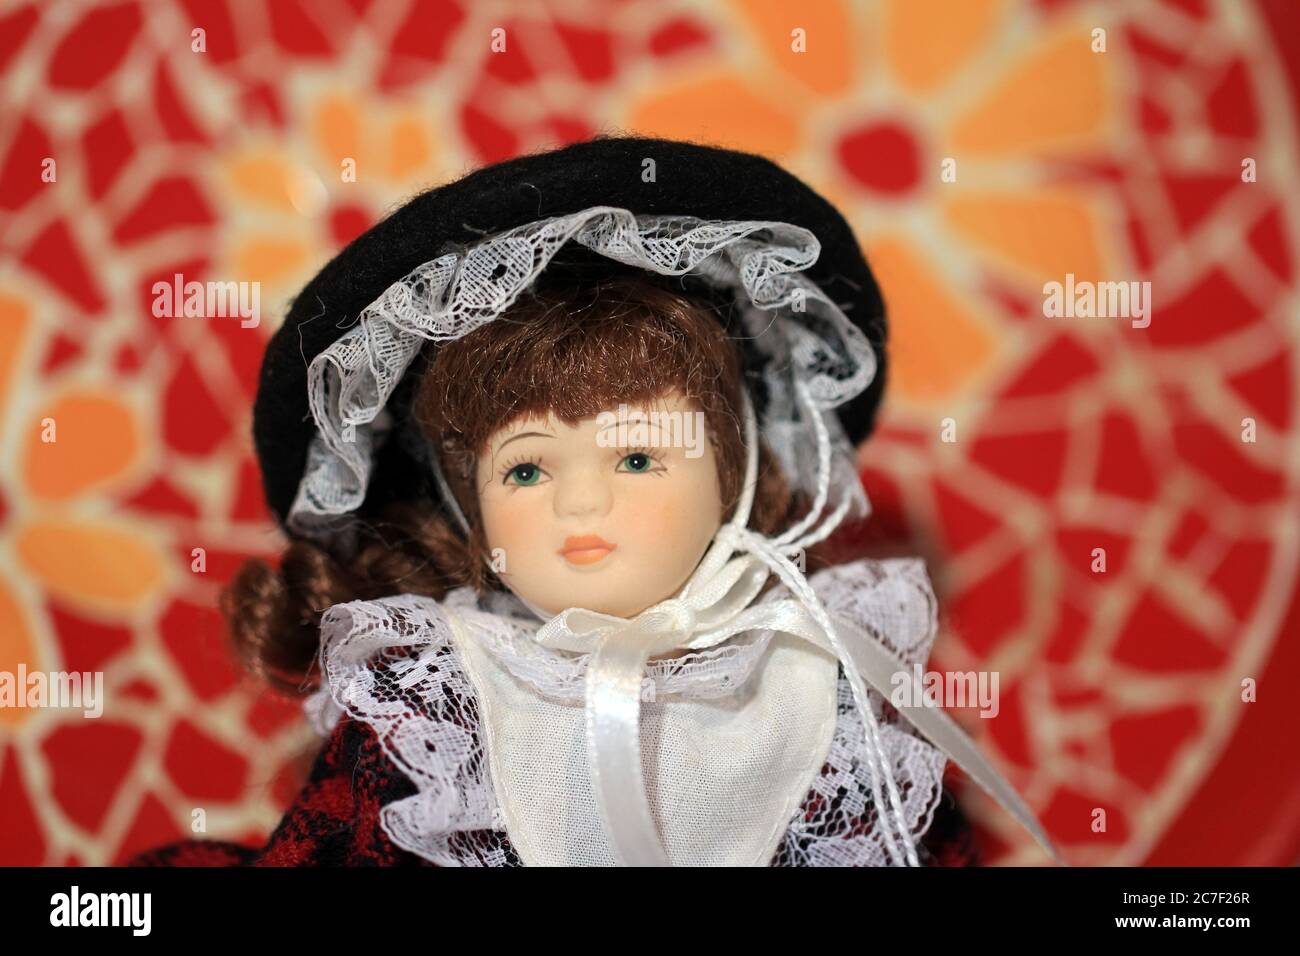 Horizontal shot of a porcelain doll in a white and black dress in a charity store Stock Photo